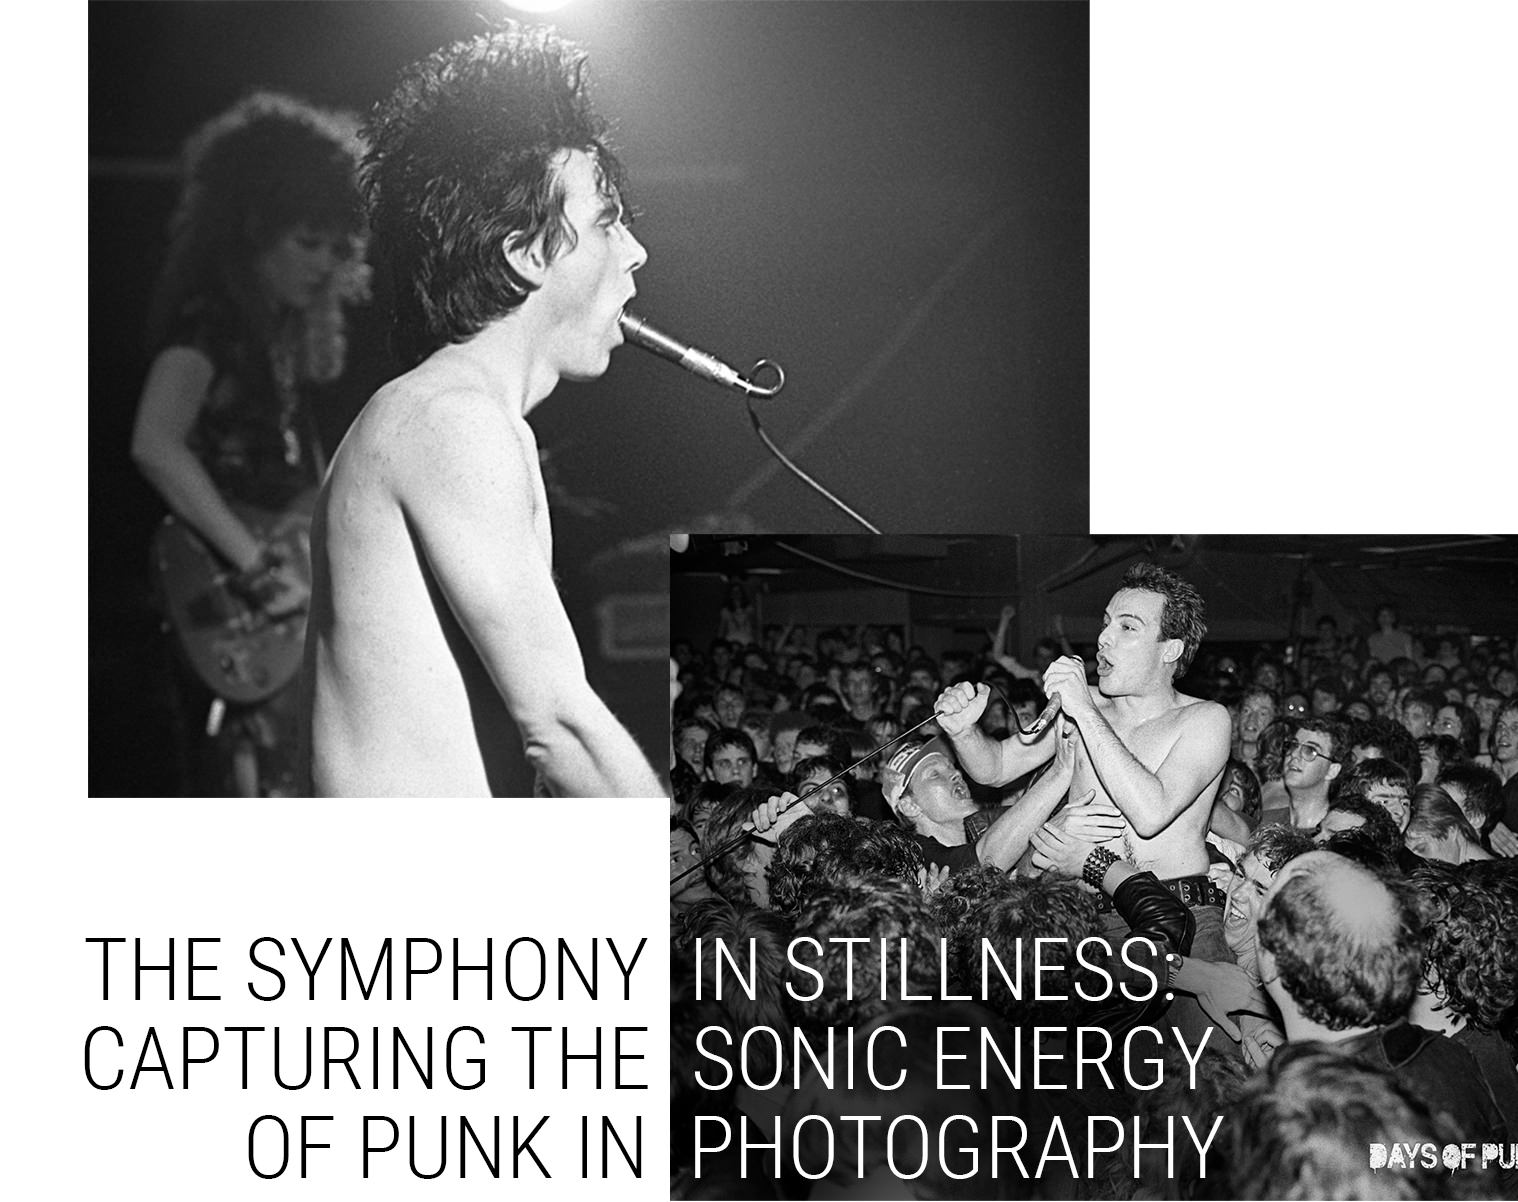 Capturing-the-Sonic-Energy-of-Punk-in-Photography-Header-3.jpg